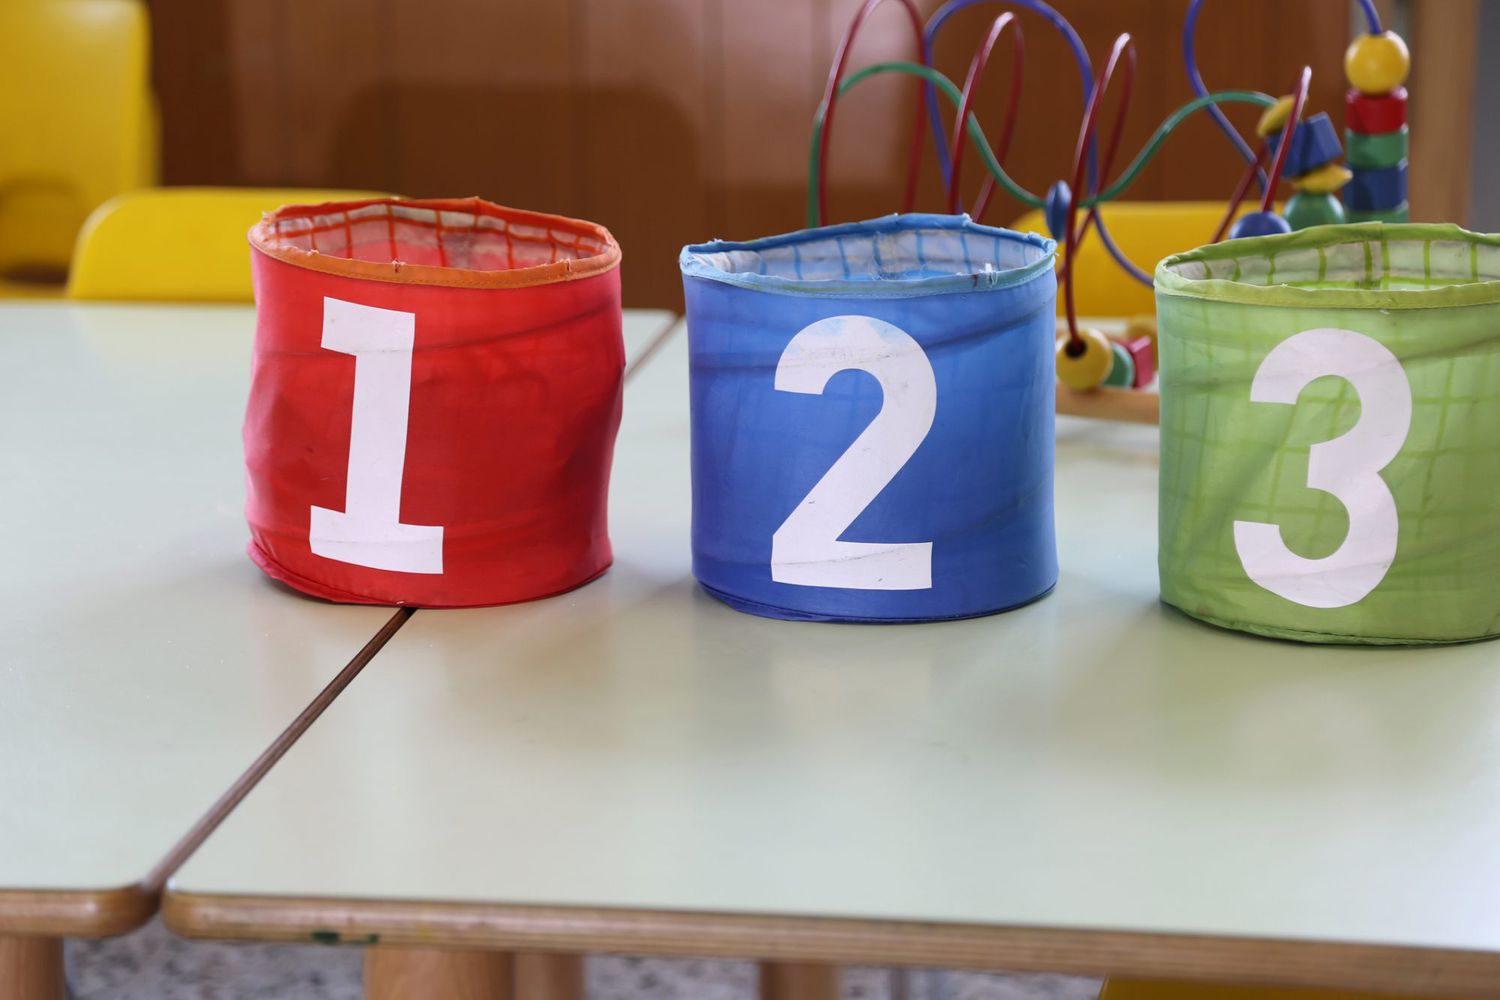 Containers With Numbers On Table